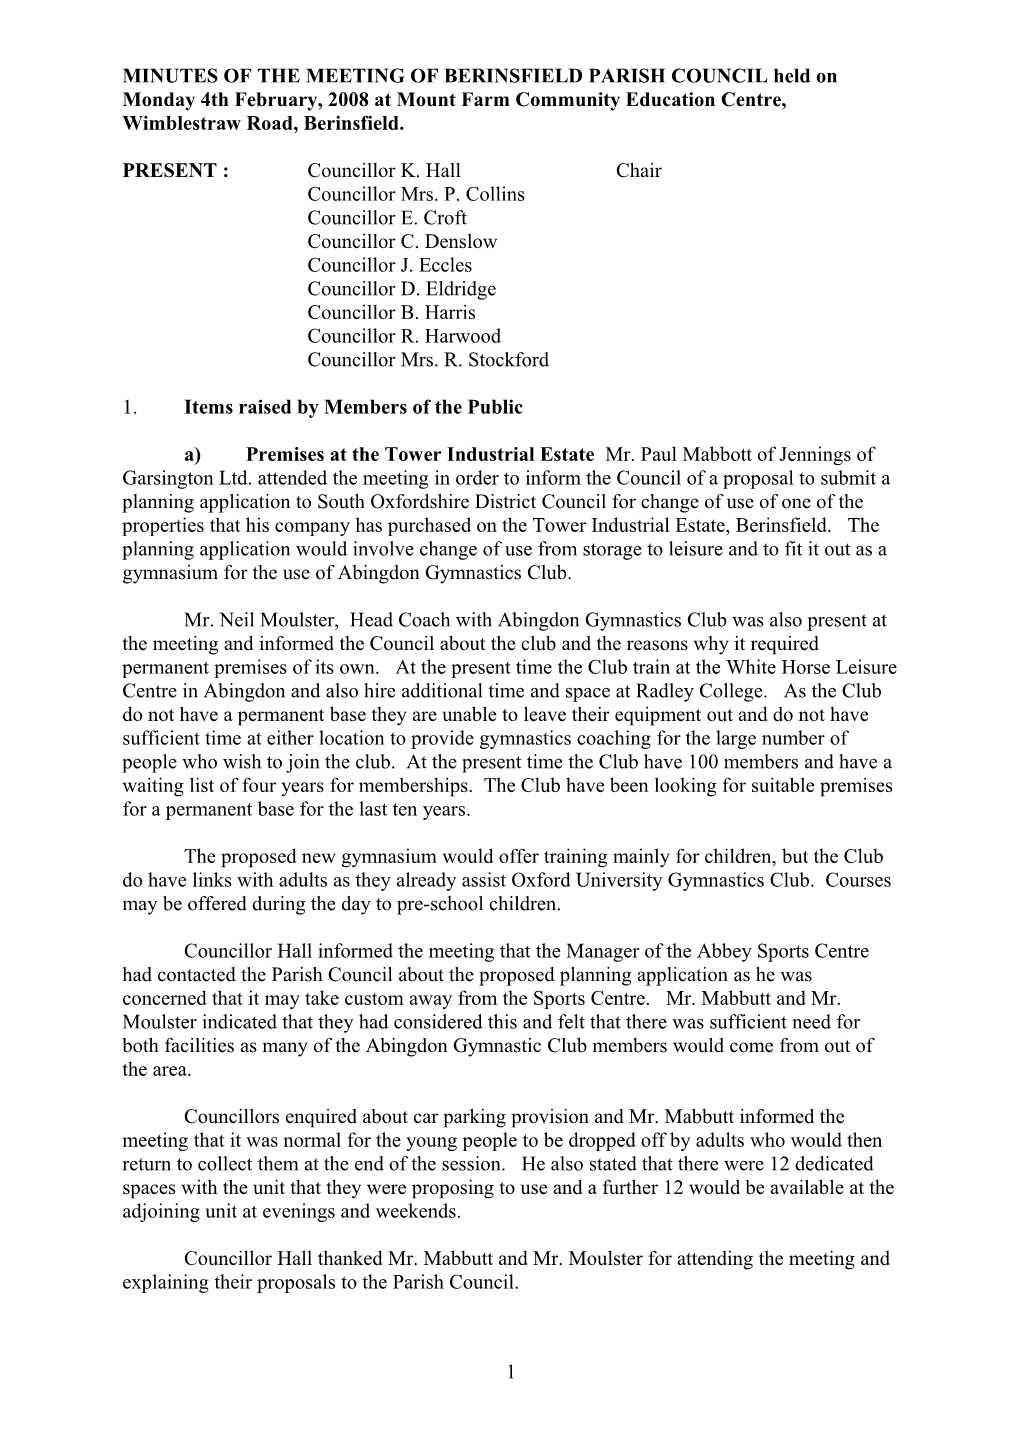 MINUTES of the MEETING of BERINSFIELD PARISH COUNCIL Held on Monday 5Th June, 2006 at Mount s1